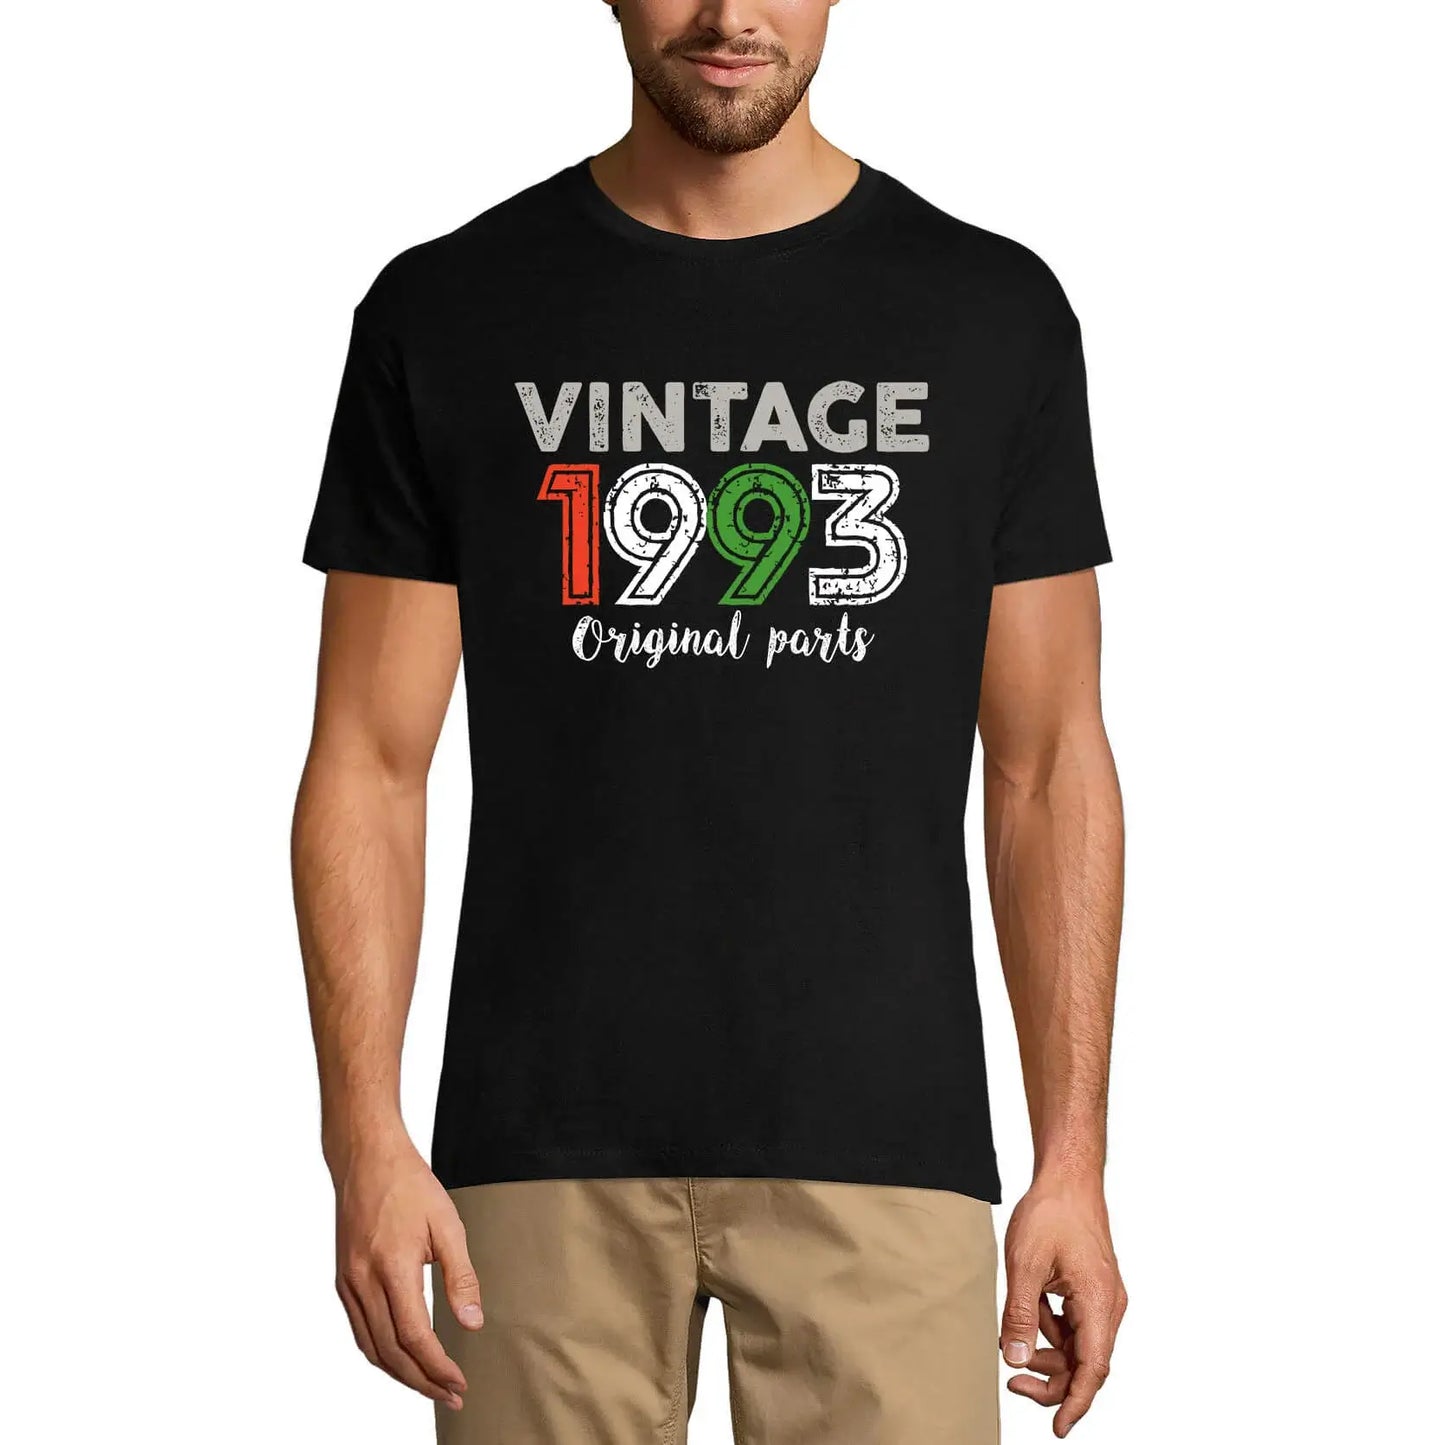 Men's Graphic T-Shirt Original Parts 1993 31st Birthday Anniversary 31 Year Old Gift 1993 Vintage Eco-Friendly Short Sleeve Novelty Tee